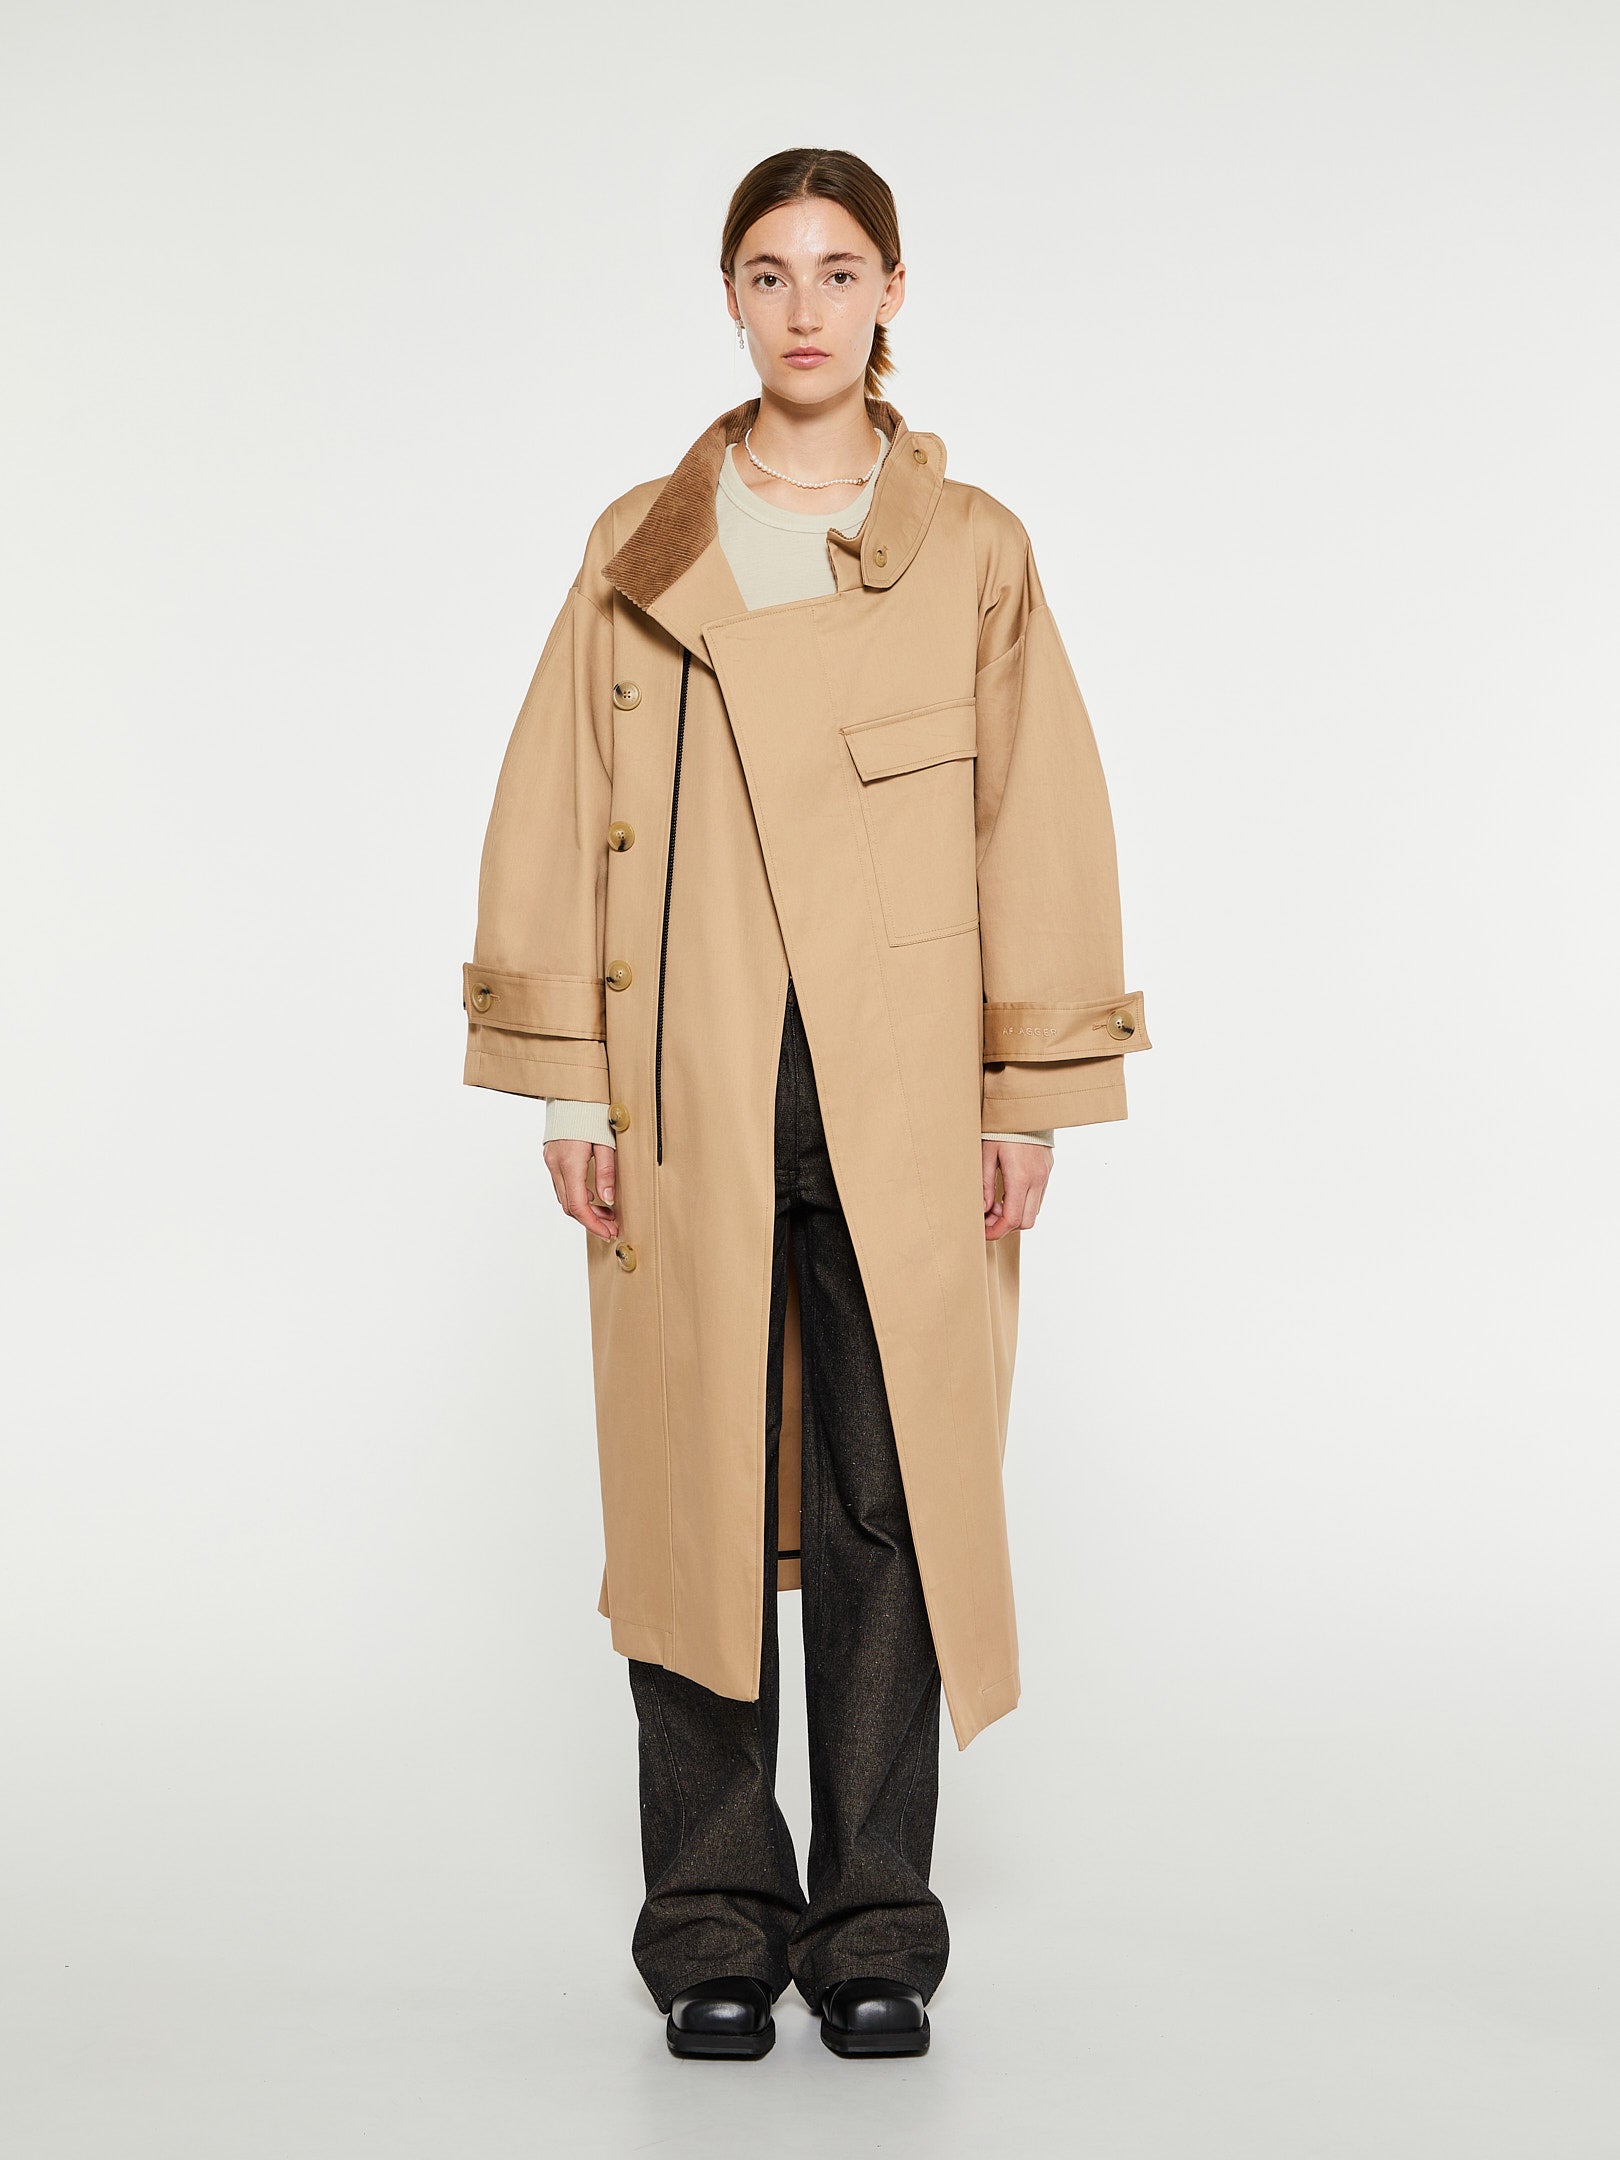 Coats & Jackets for women Shop | the at selection stoy